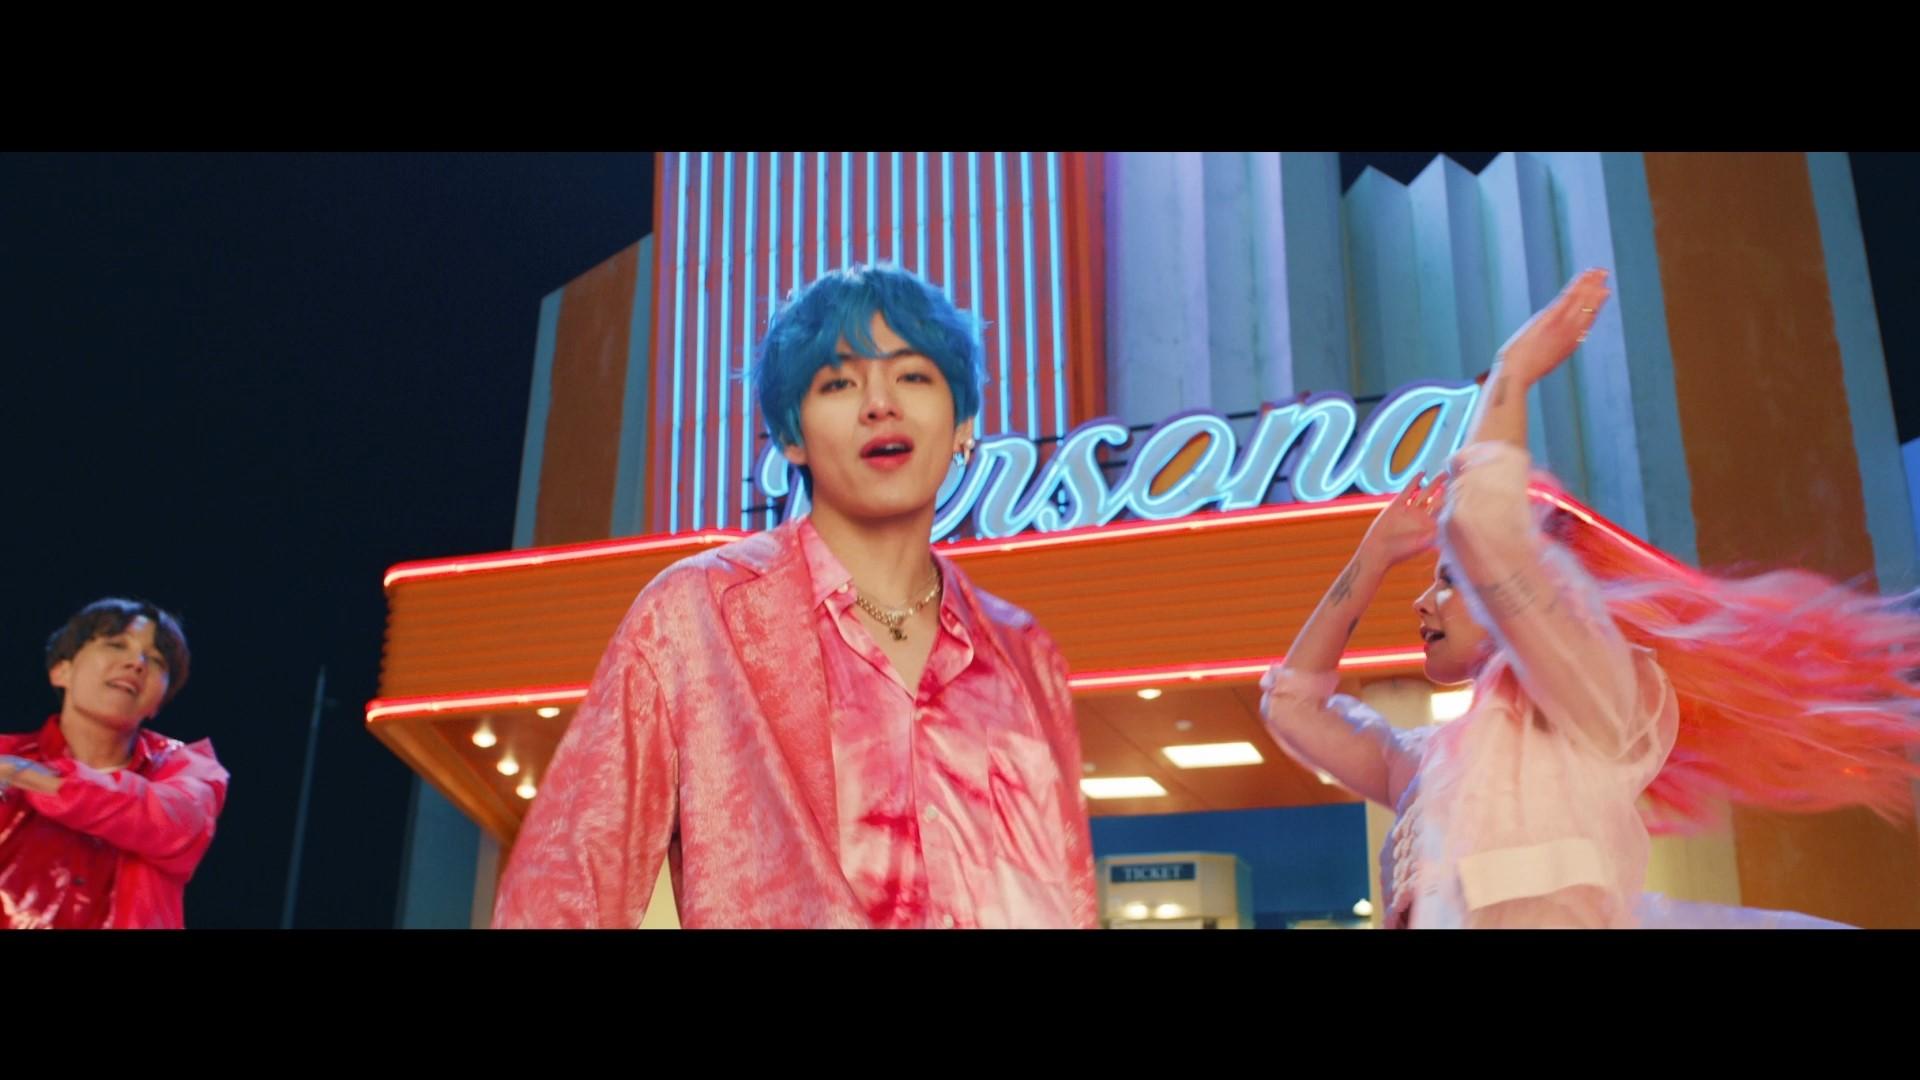 BTS' (Bantan Boys) 'Boy With Luv' (feat. Halsey) Fashion Review